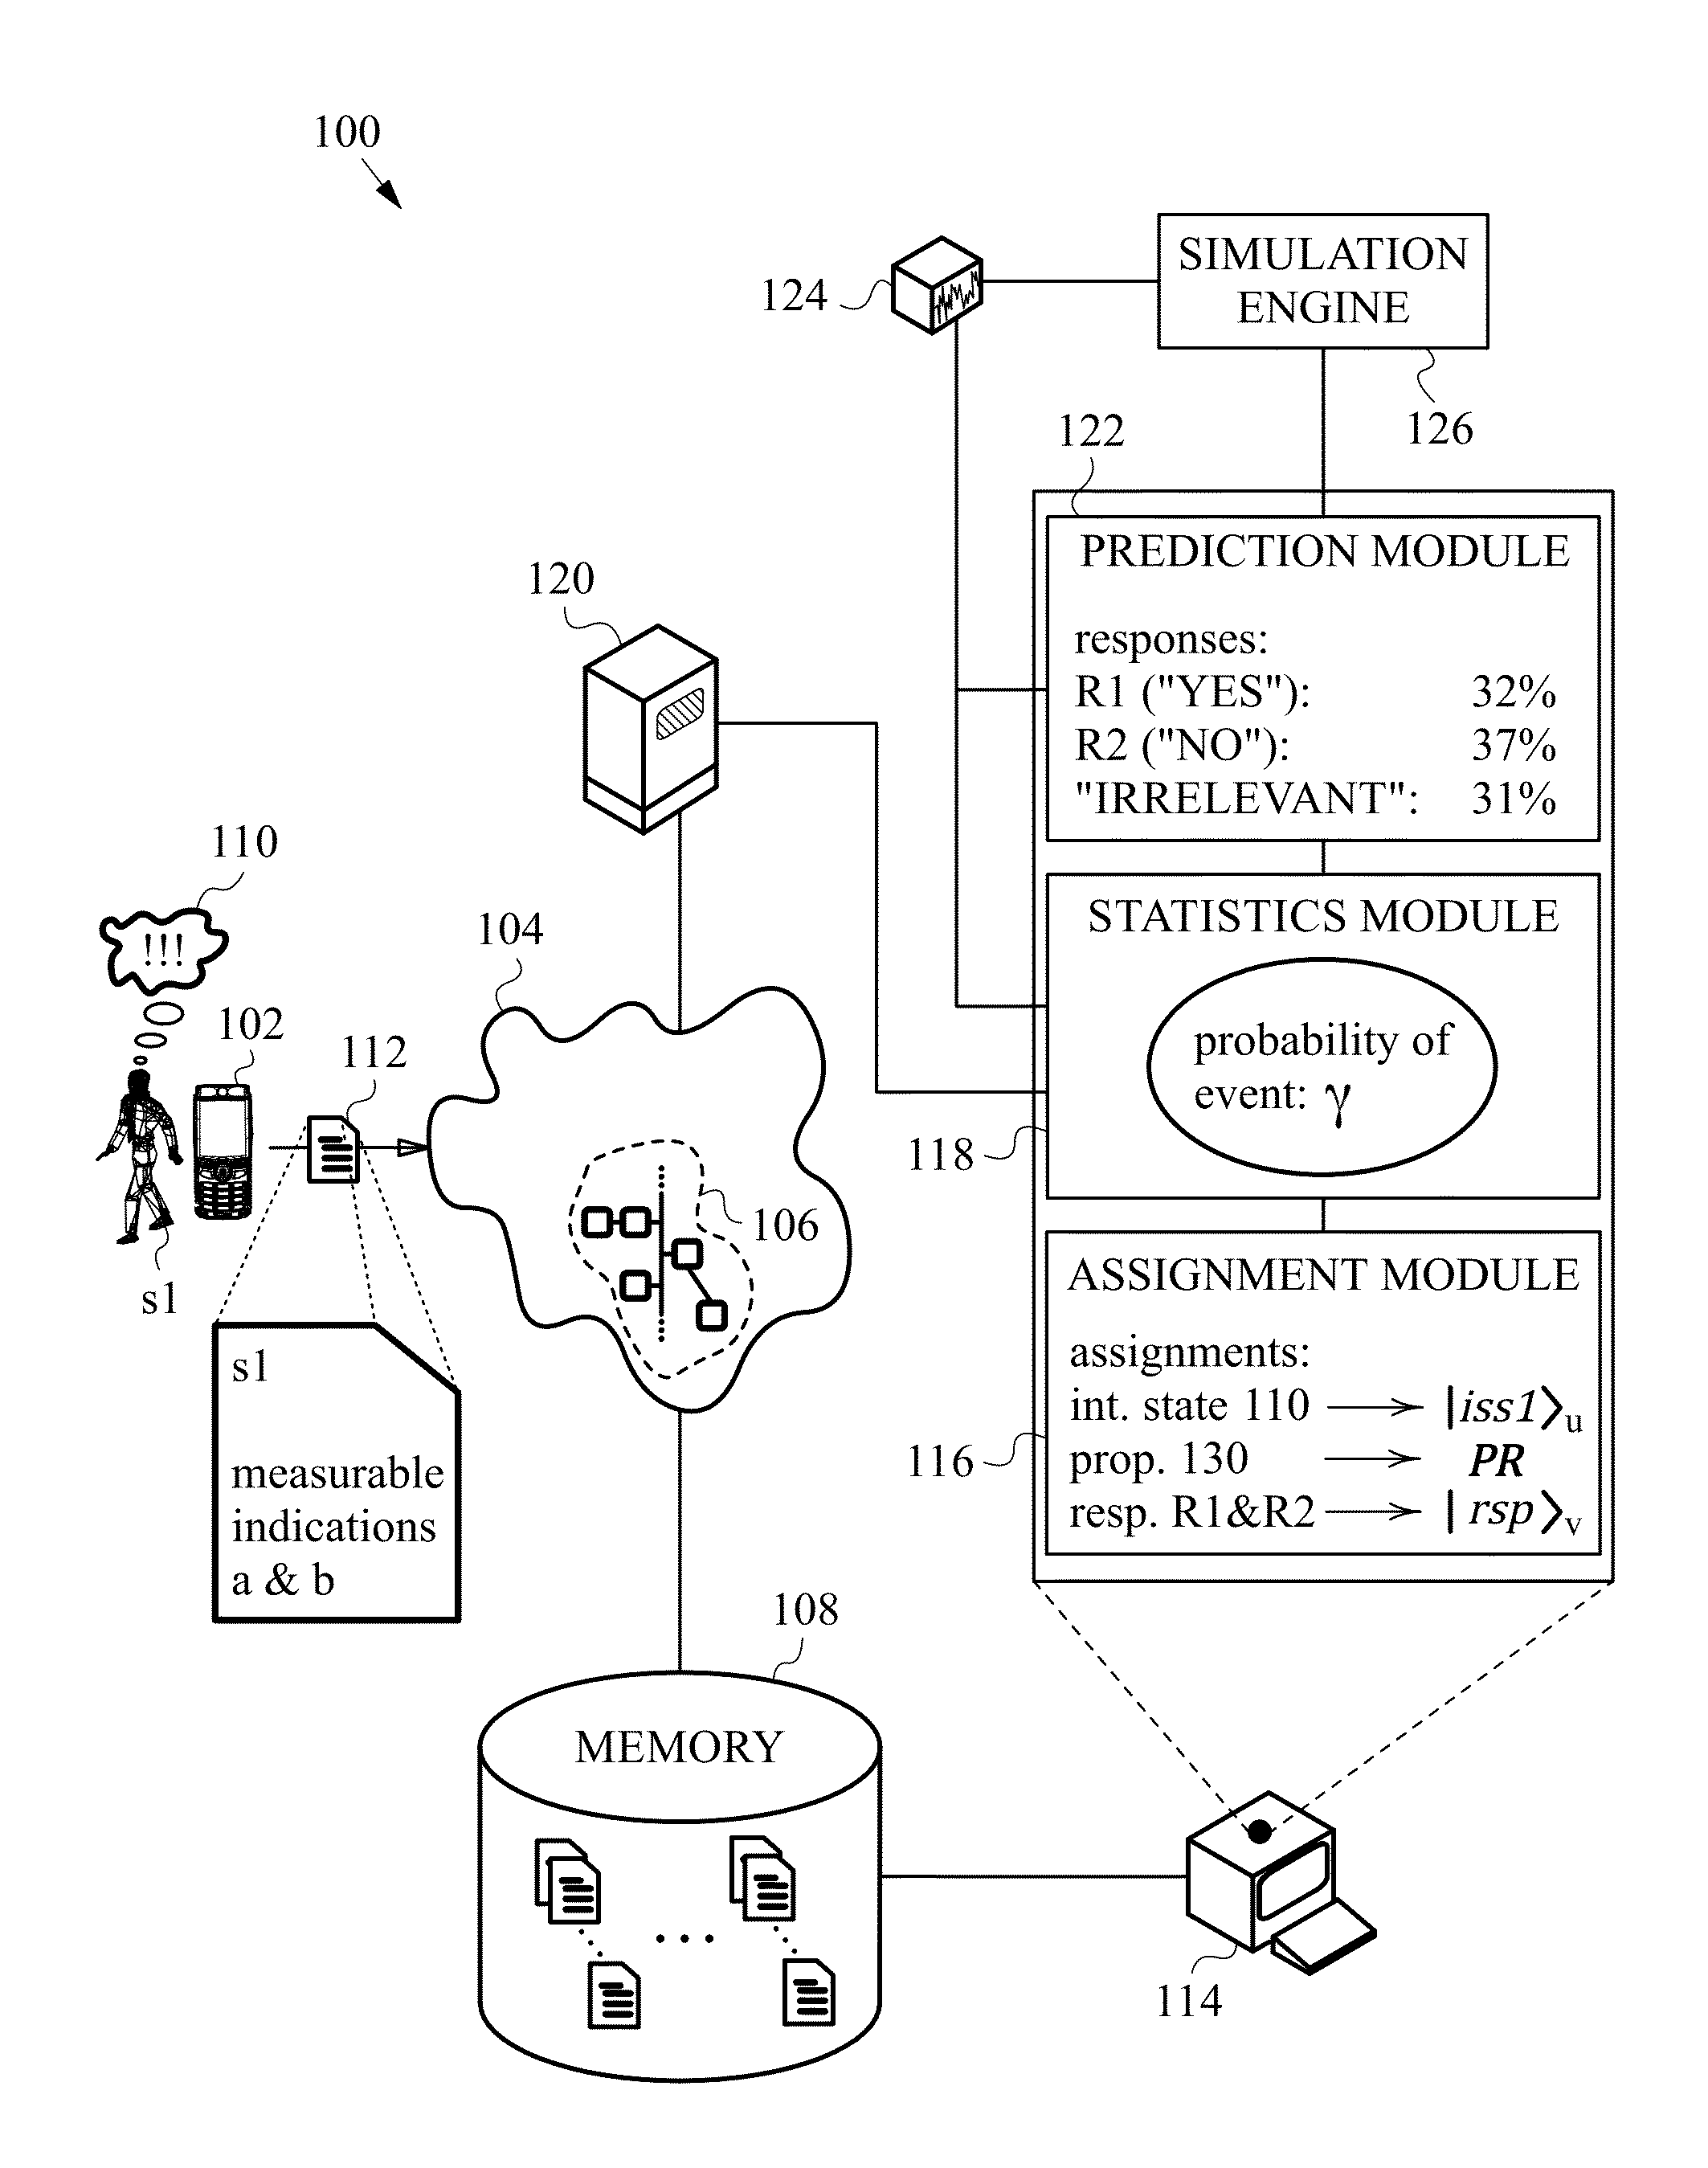 Method and Apparatus for Predicting Subject Responses to a Proposition based on Quantum Representation of the Subject's Internal State and of the Proposition